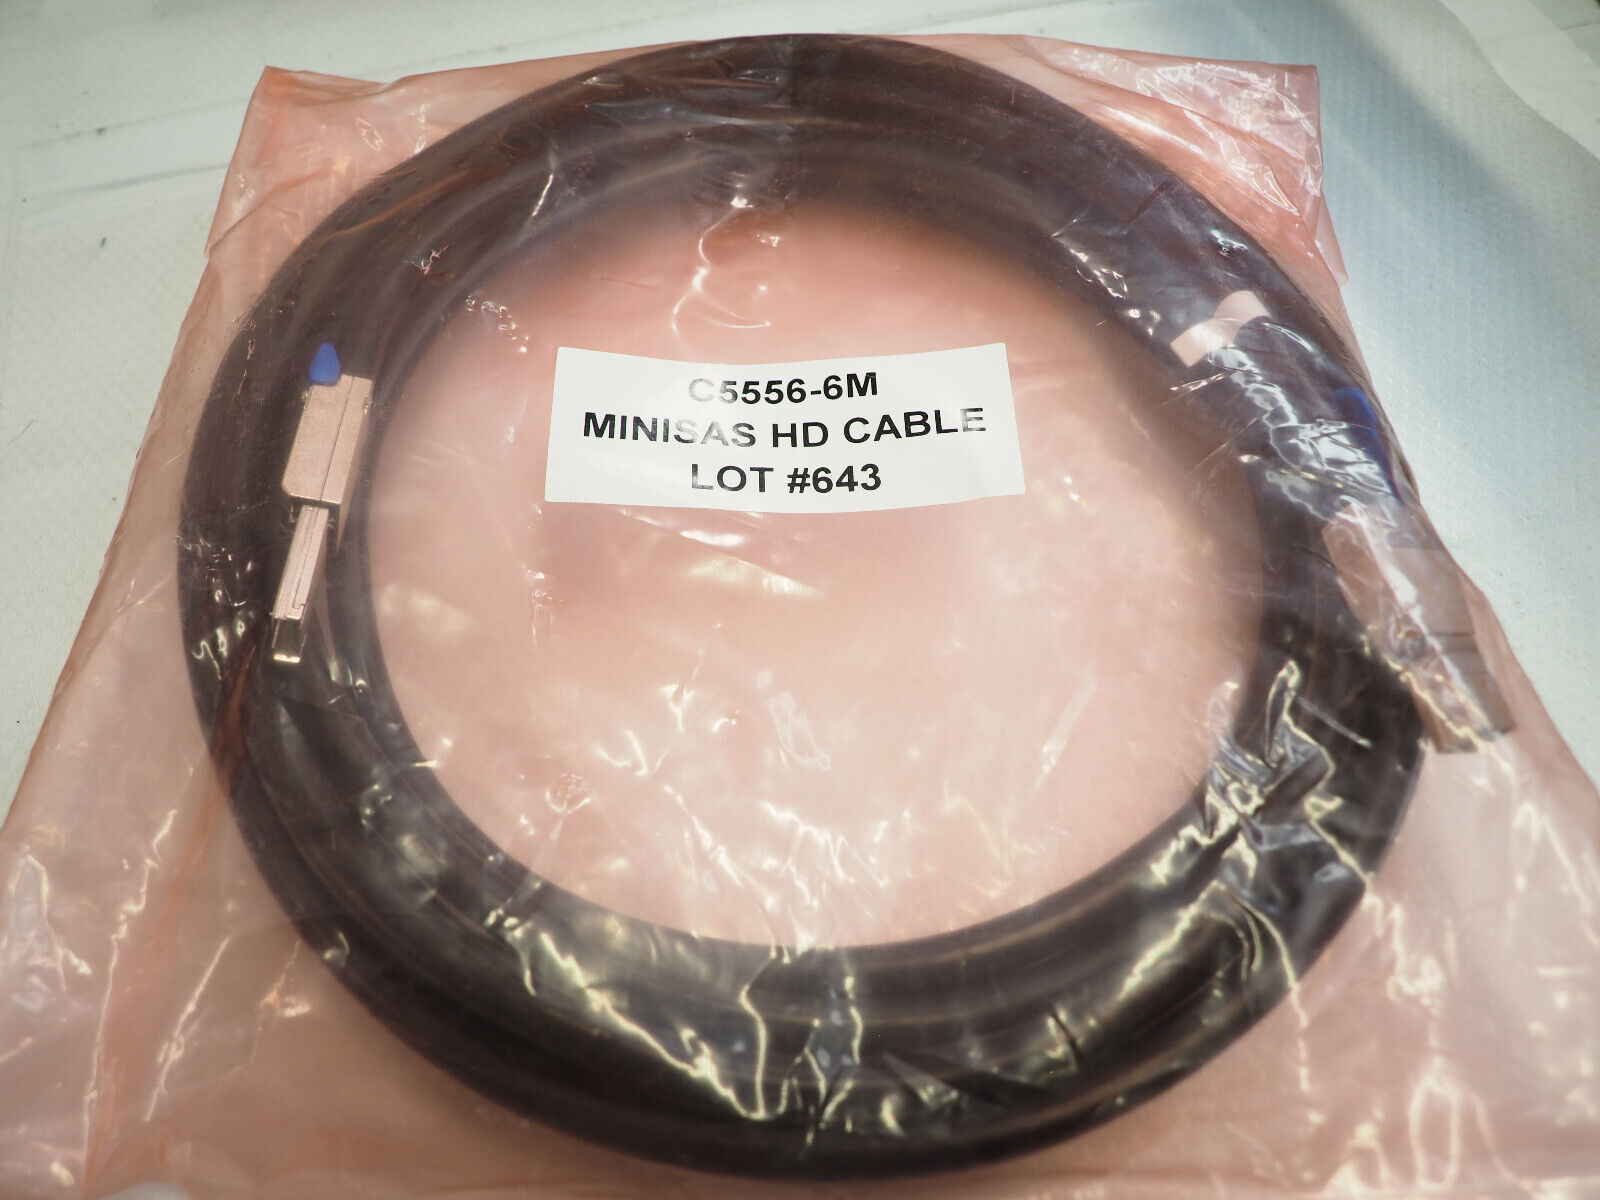 AMPHENOL Spectra-Strip Skewclear C5556-6M Minisas HD Cable